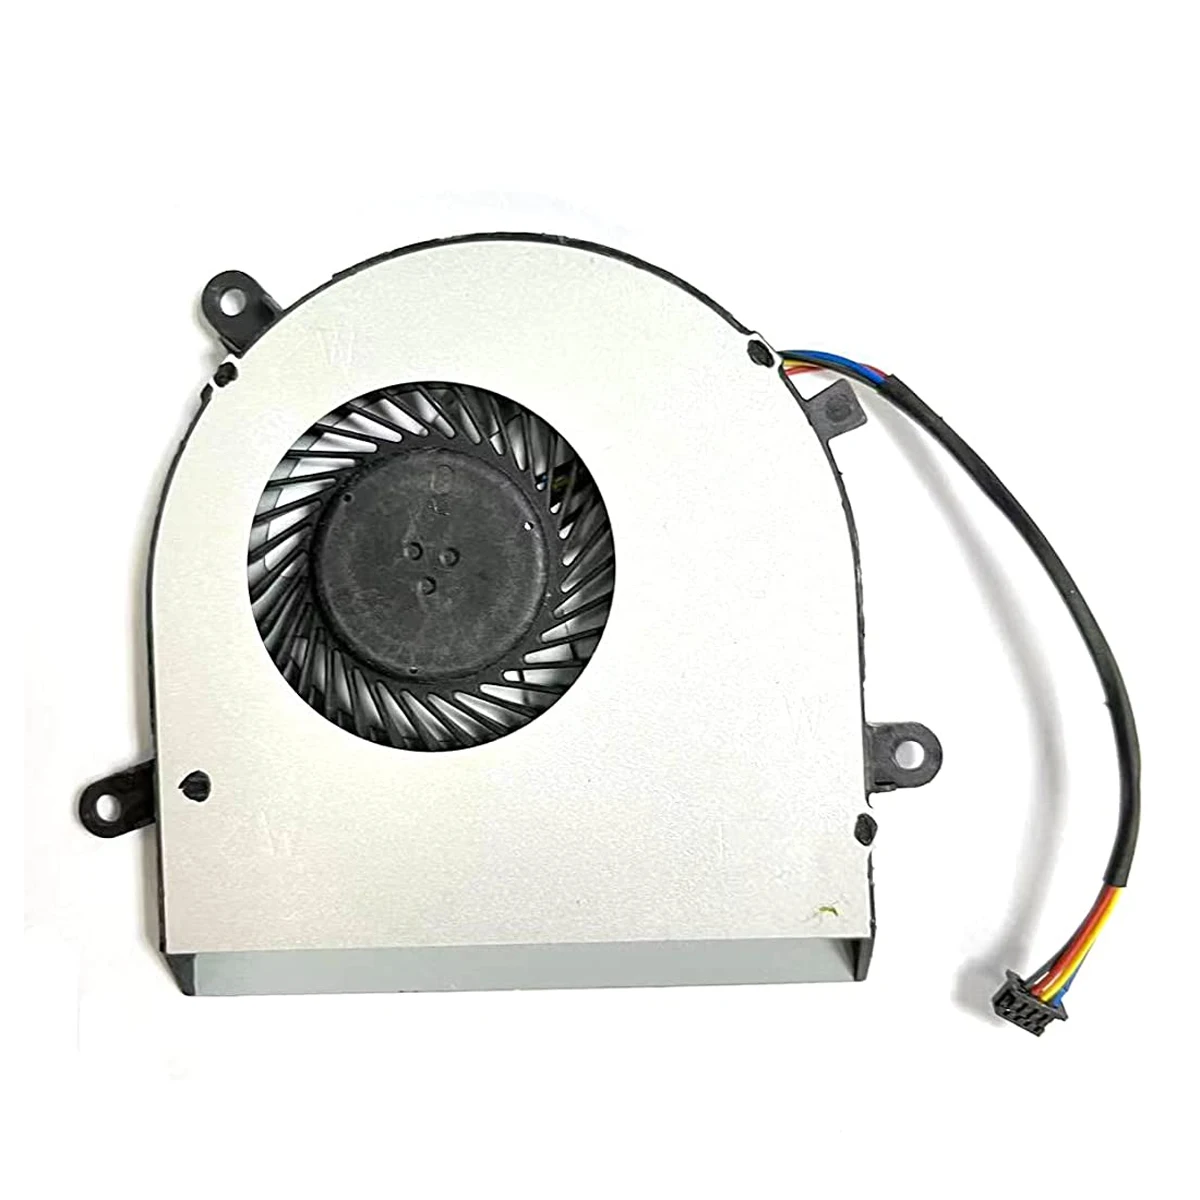 Laptop CPU Cooling Fan Cooling Cooler for Inspiron 24 3475 Cooling Radiators High Speed Fan Powerful CPU Cooler